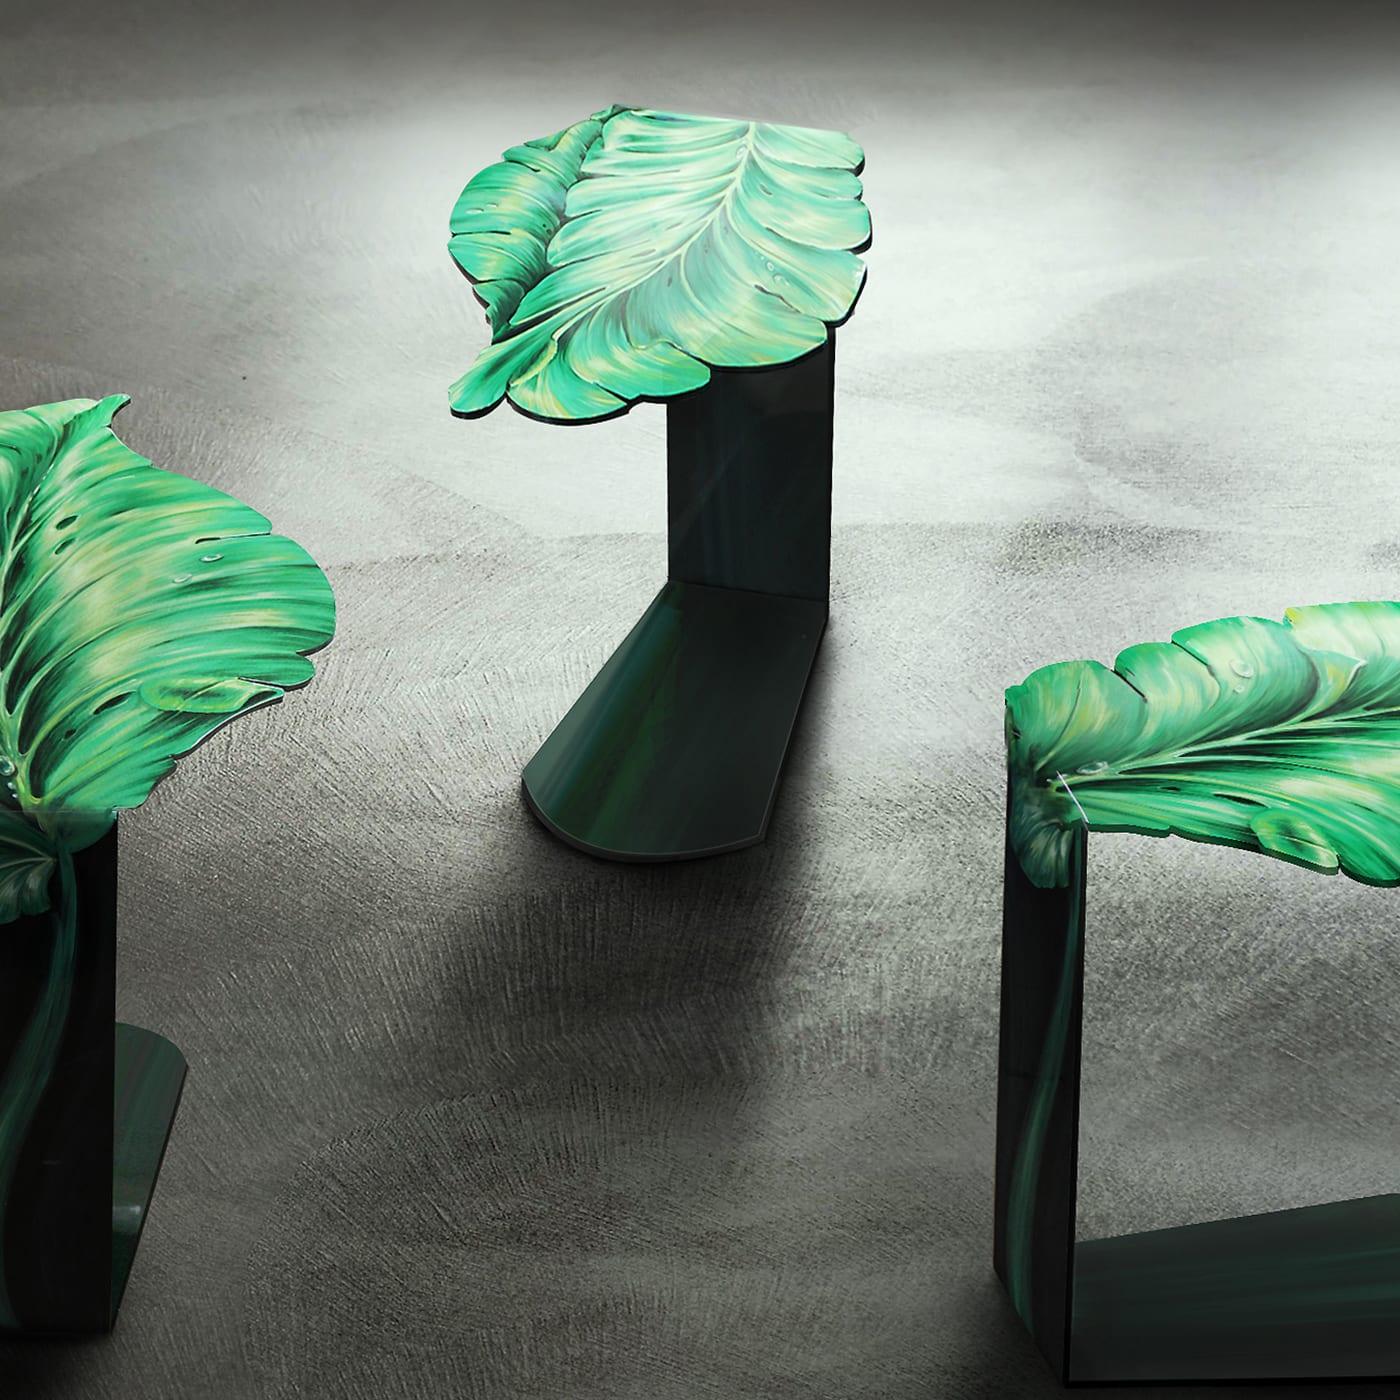 A celebration of nature obtained from metal, this exquisite side table gifts with the illusion of having a piece of the forest right beside your sofa or bed. Its fresh aesthetic is obtained by laser-cutting and bending the metal before carefully